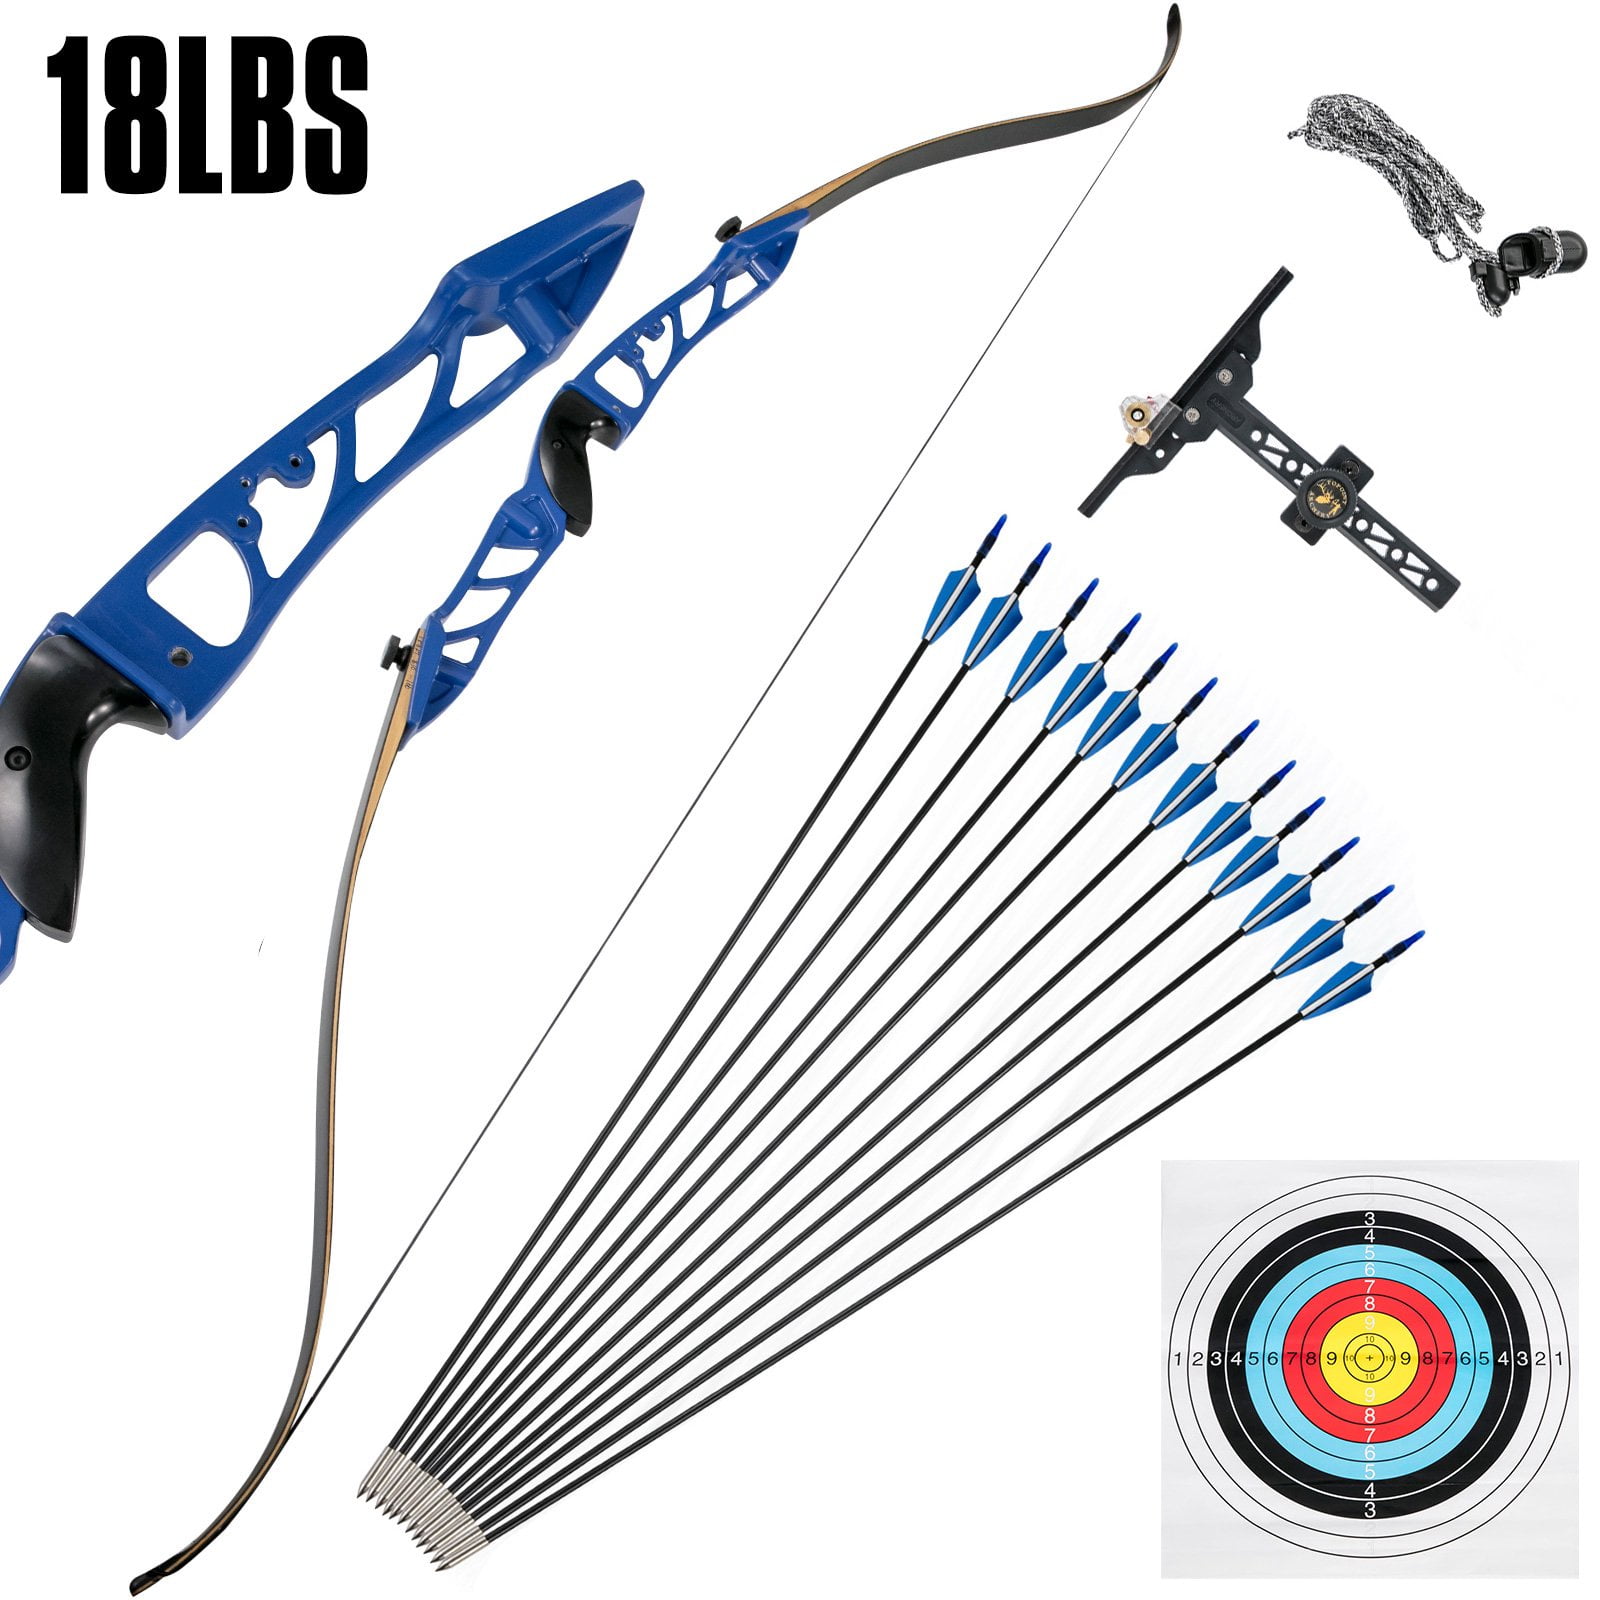 Archery Ladies Metal Recurve Bow Set Complete With String & Arrow Rest **White** 